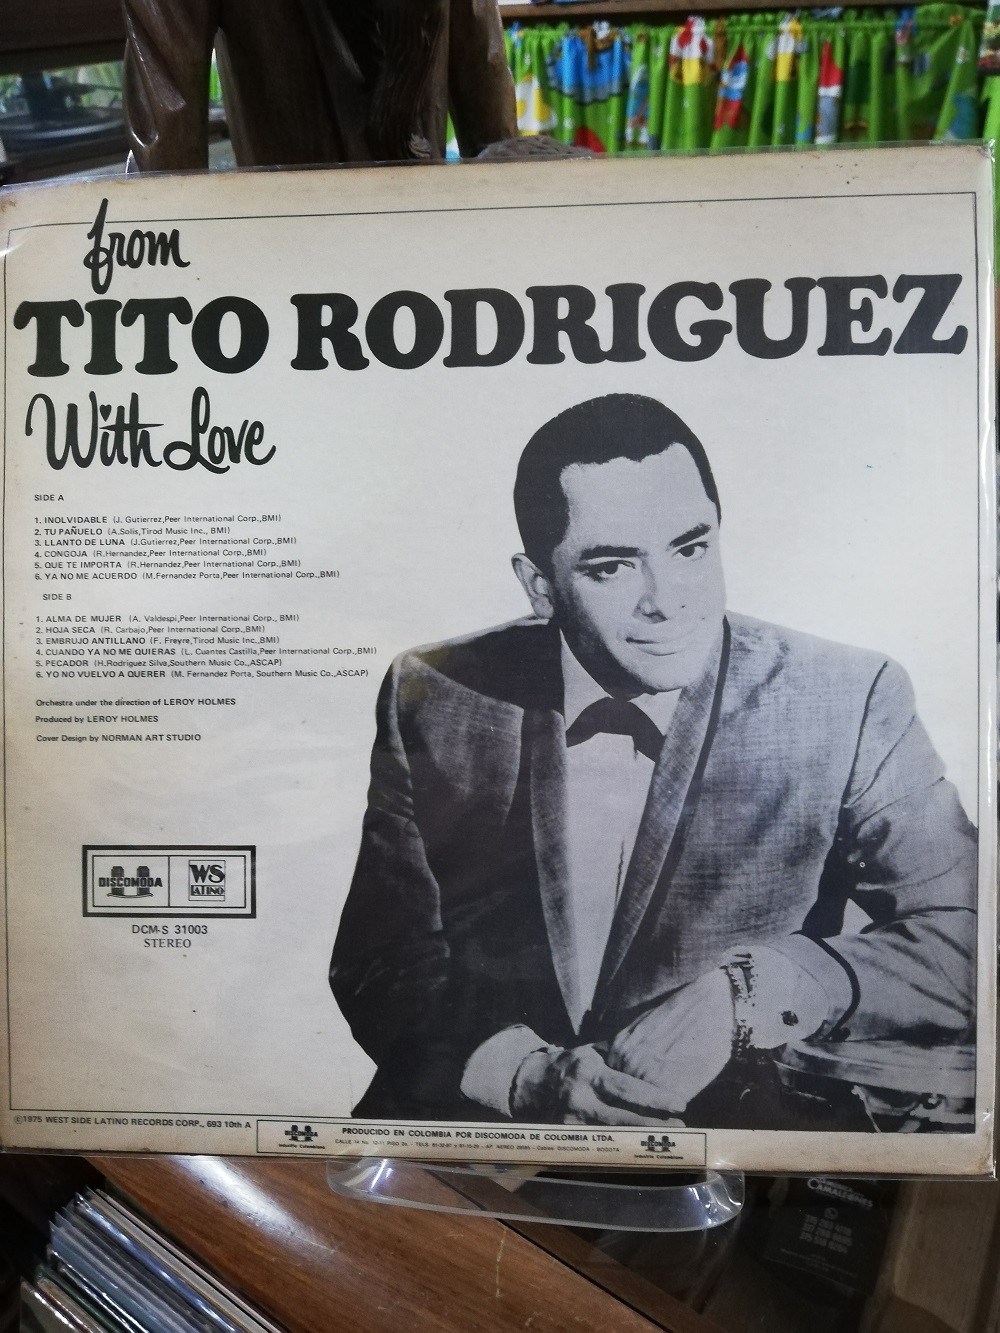 Imagen LP TITO RODRIGUEZ - FROM TITO RODRIGUEZ WITH LOVE 2